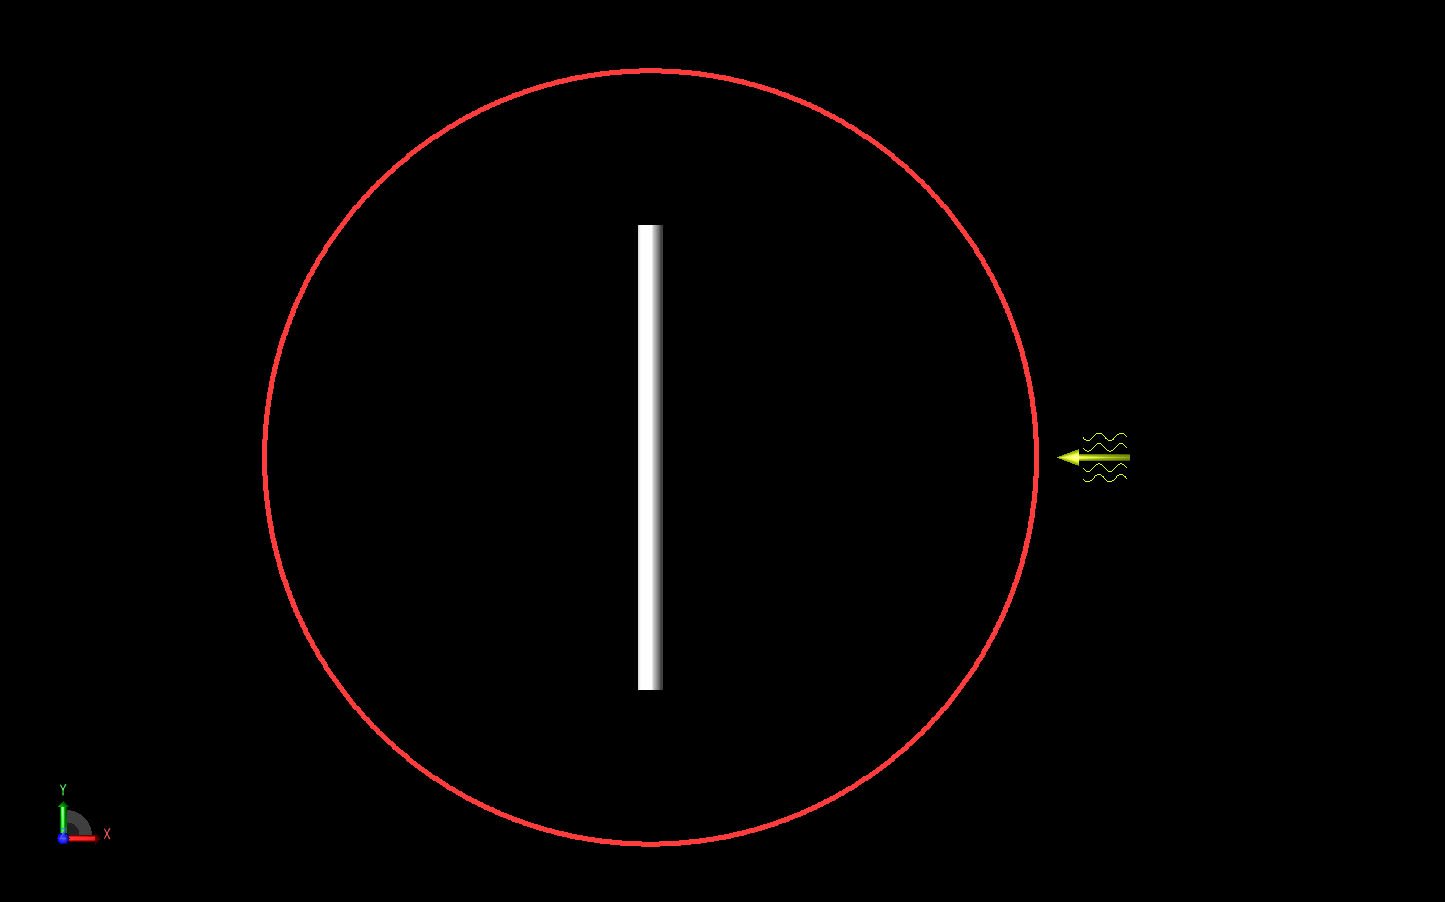 Figure 1The cylinder geometry is shown oriented along the Y axis. The incident plane wave is shown as a yellow arrow to the right. The red circle represents the far field pattern that will be computed in the XY plane.